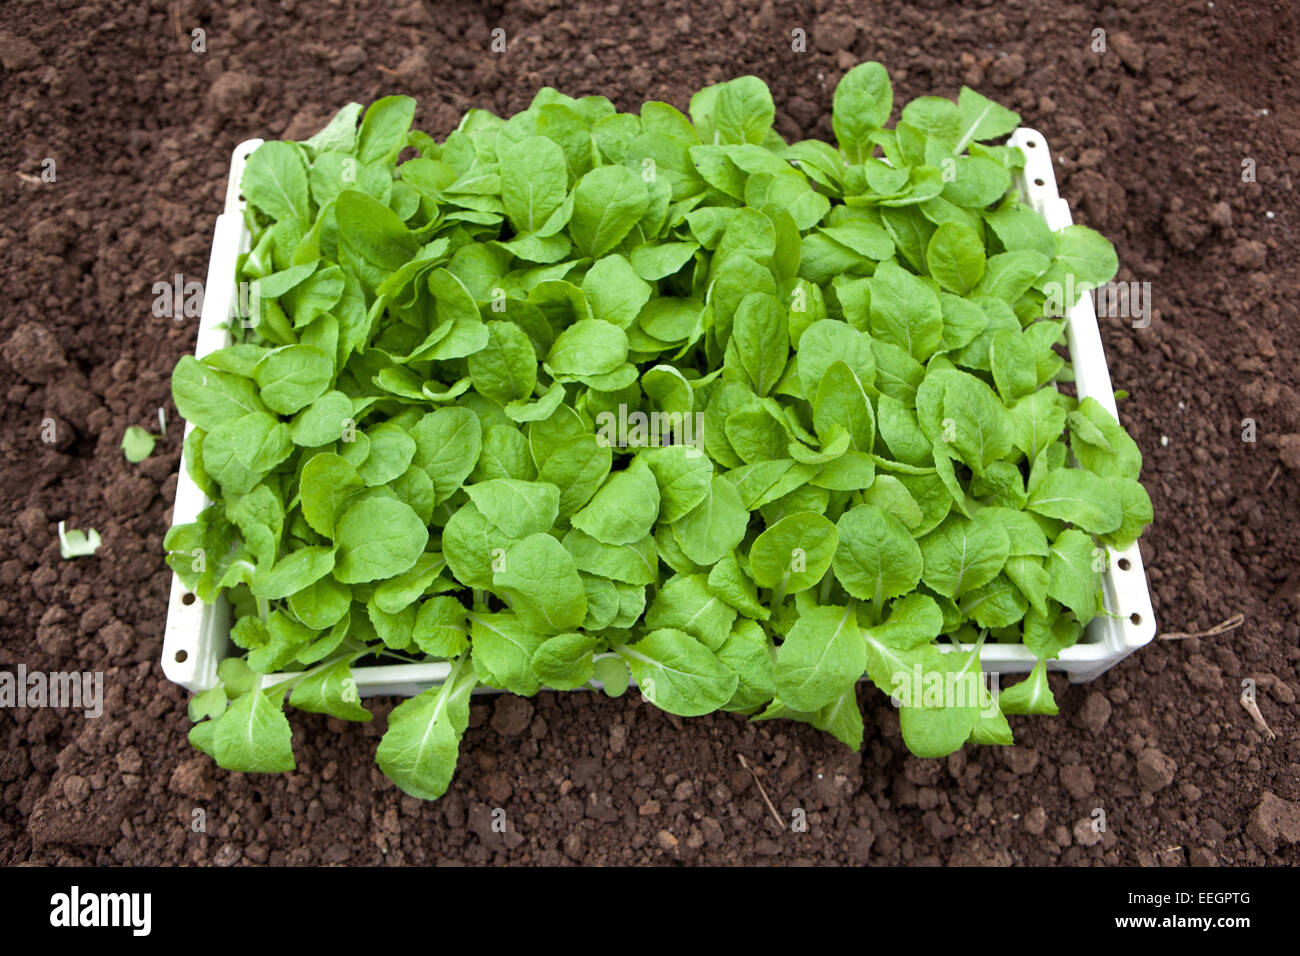 Chinese cabbage seedlings in a crate ready for planting in the ground, Czech Republic Vegetable seedlings in a tray Stock Photo